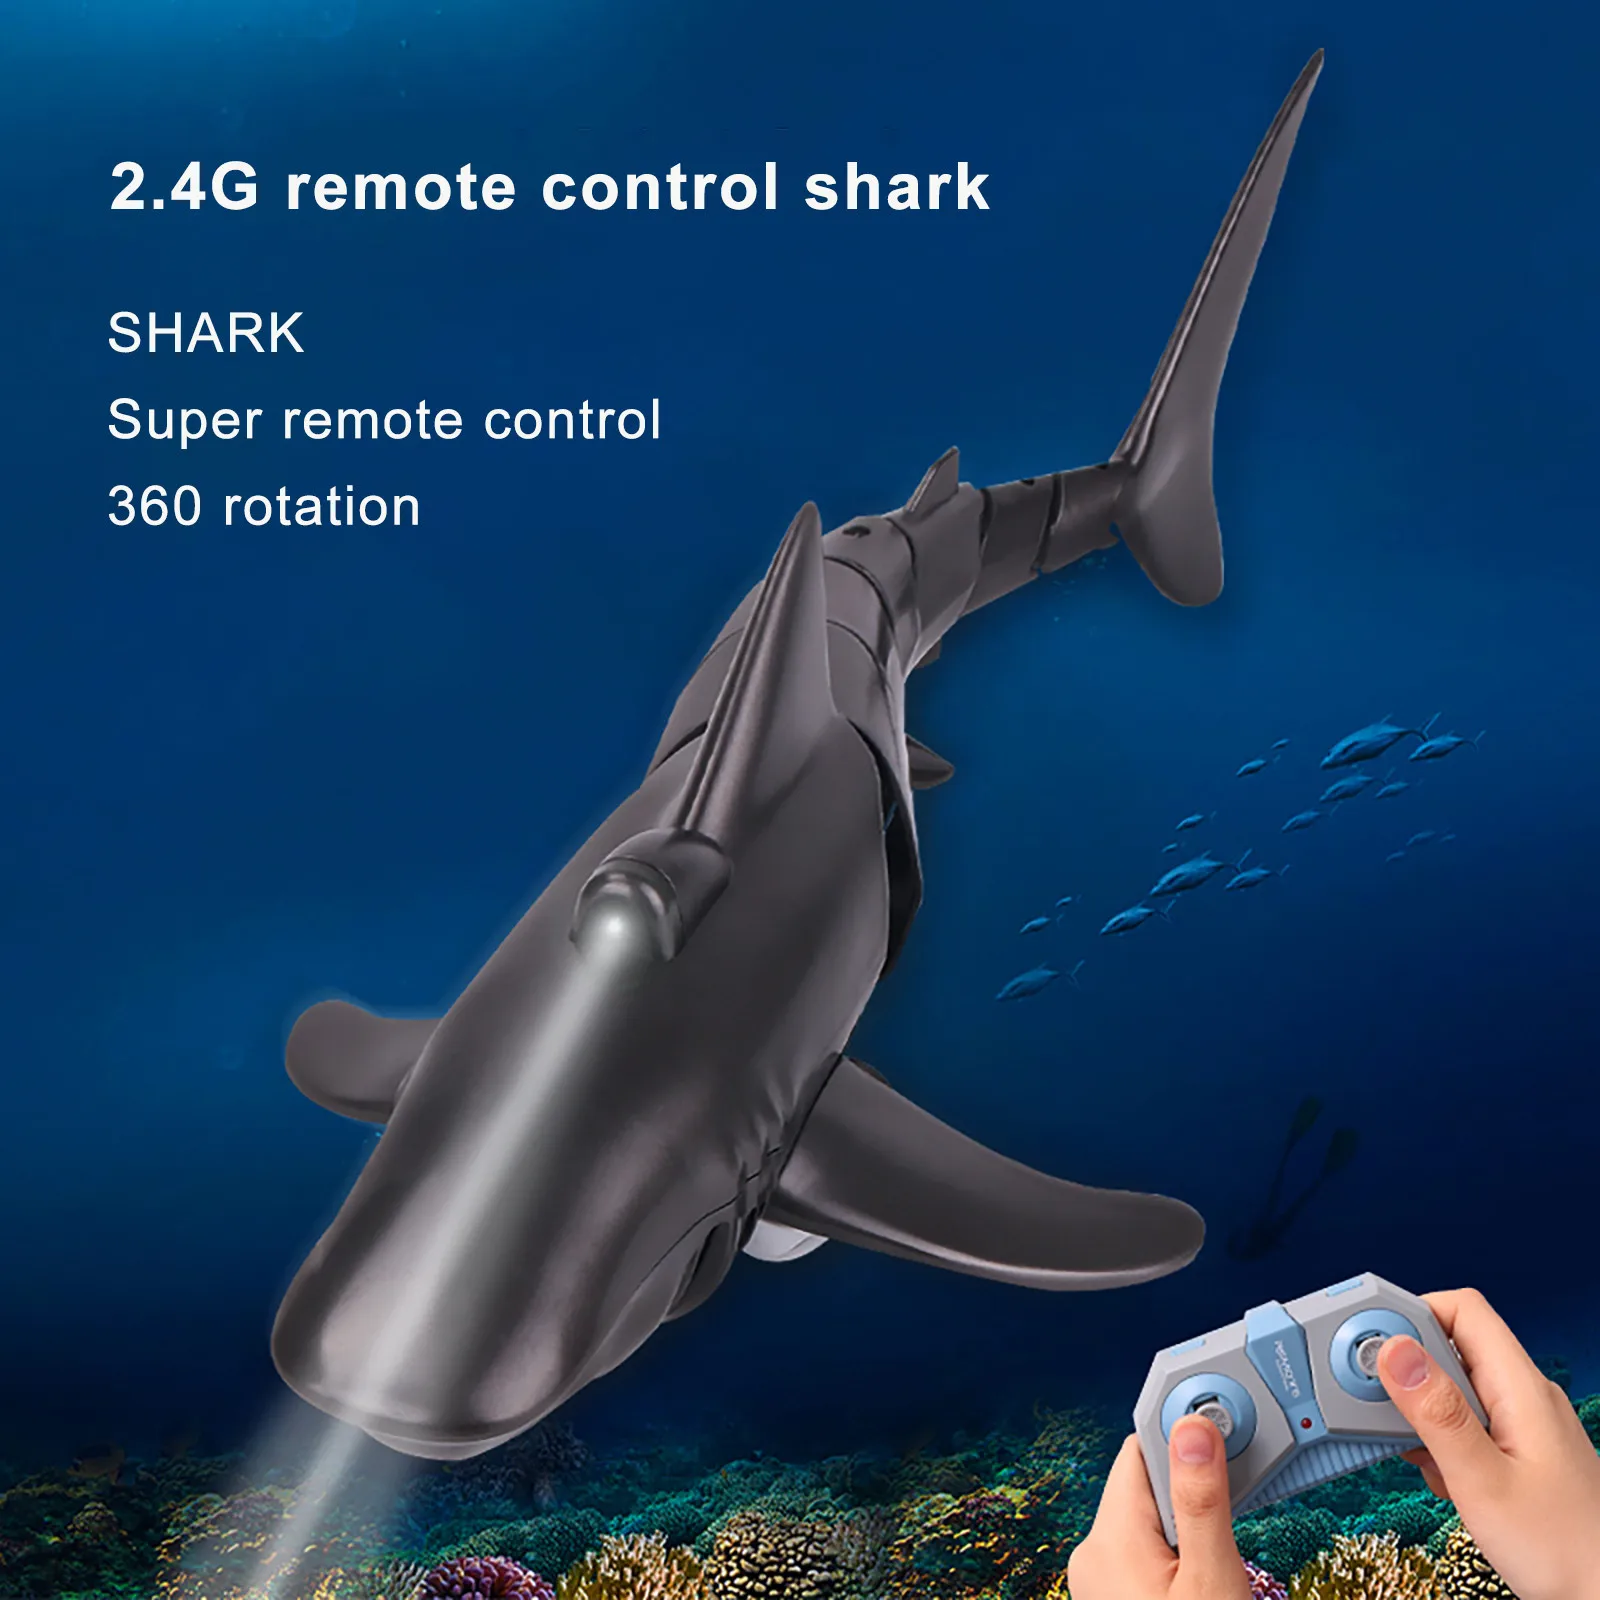 Toy RC Boat 2.4G Remote Control Shark with Head Light Simulation RC Fish Shark Boat Toy USB Rechargeable for Water Pool Bathroom Toy Pond Animal Toys Party Gifts 2020 Updated 